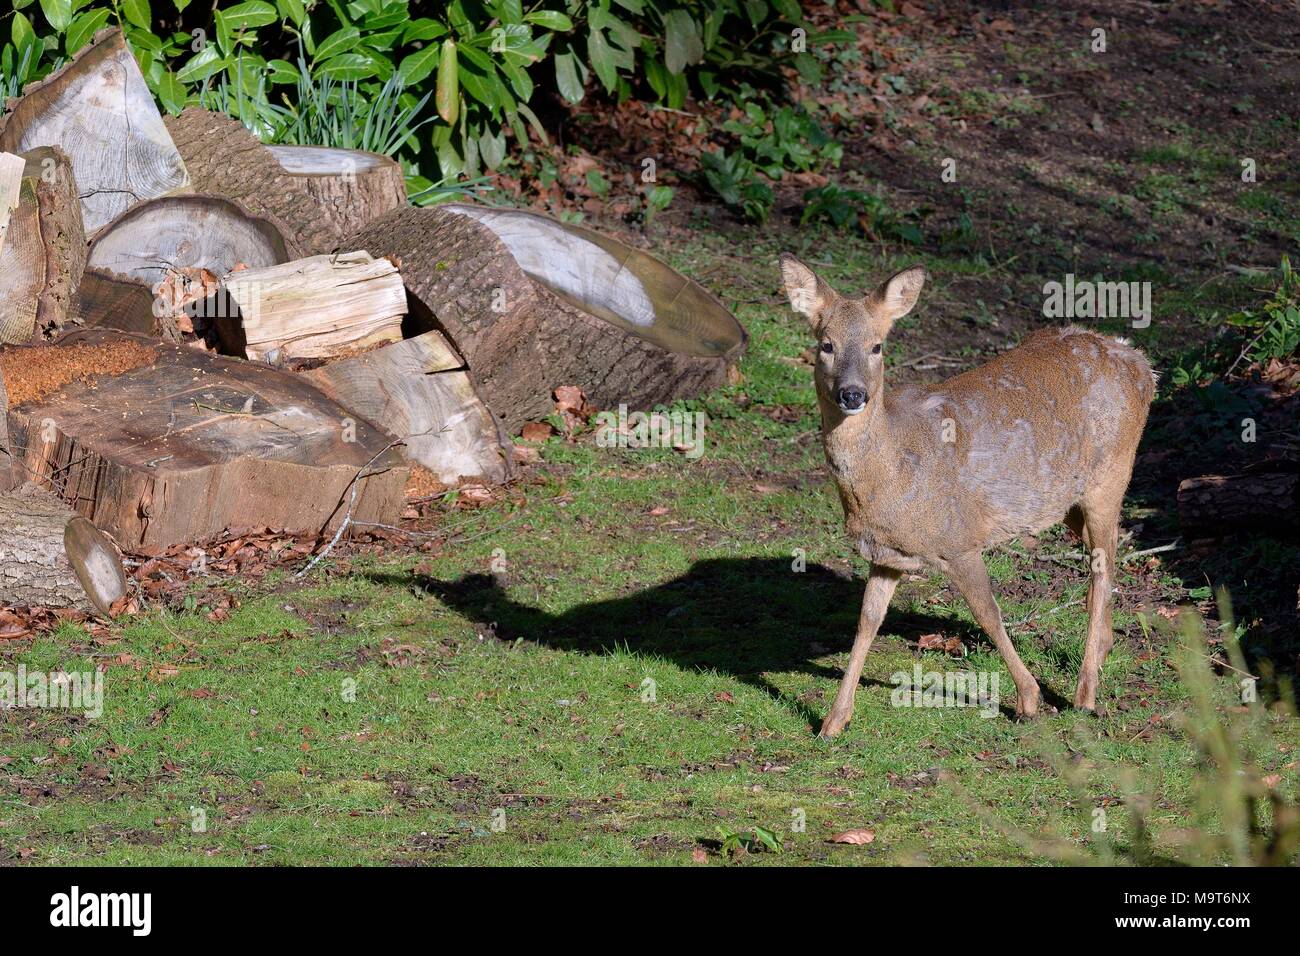 Roe deer (Capreolus capreolus) doe visiting a garden in morning sunlight to graze, walking past a wood pile and casting a shadow, Wiltshire, UK, March Stock Photo